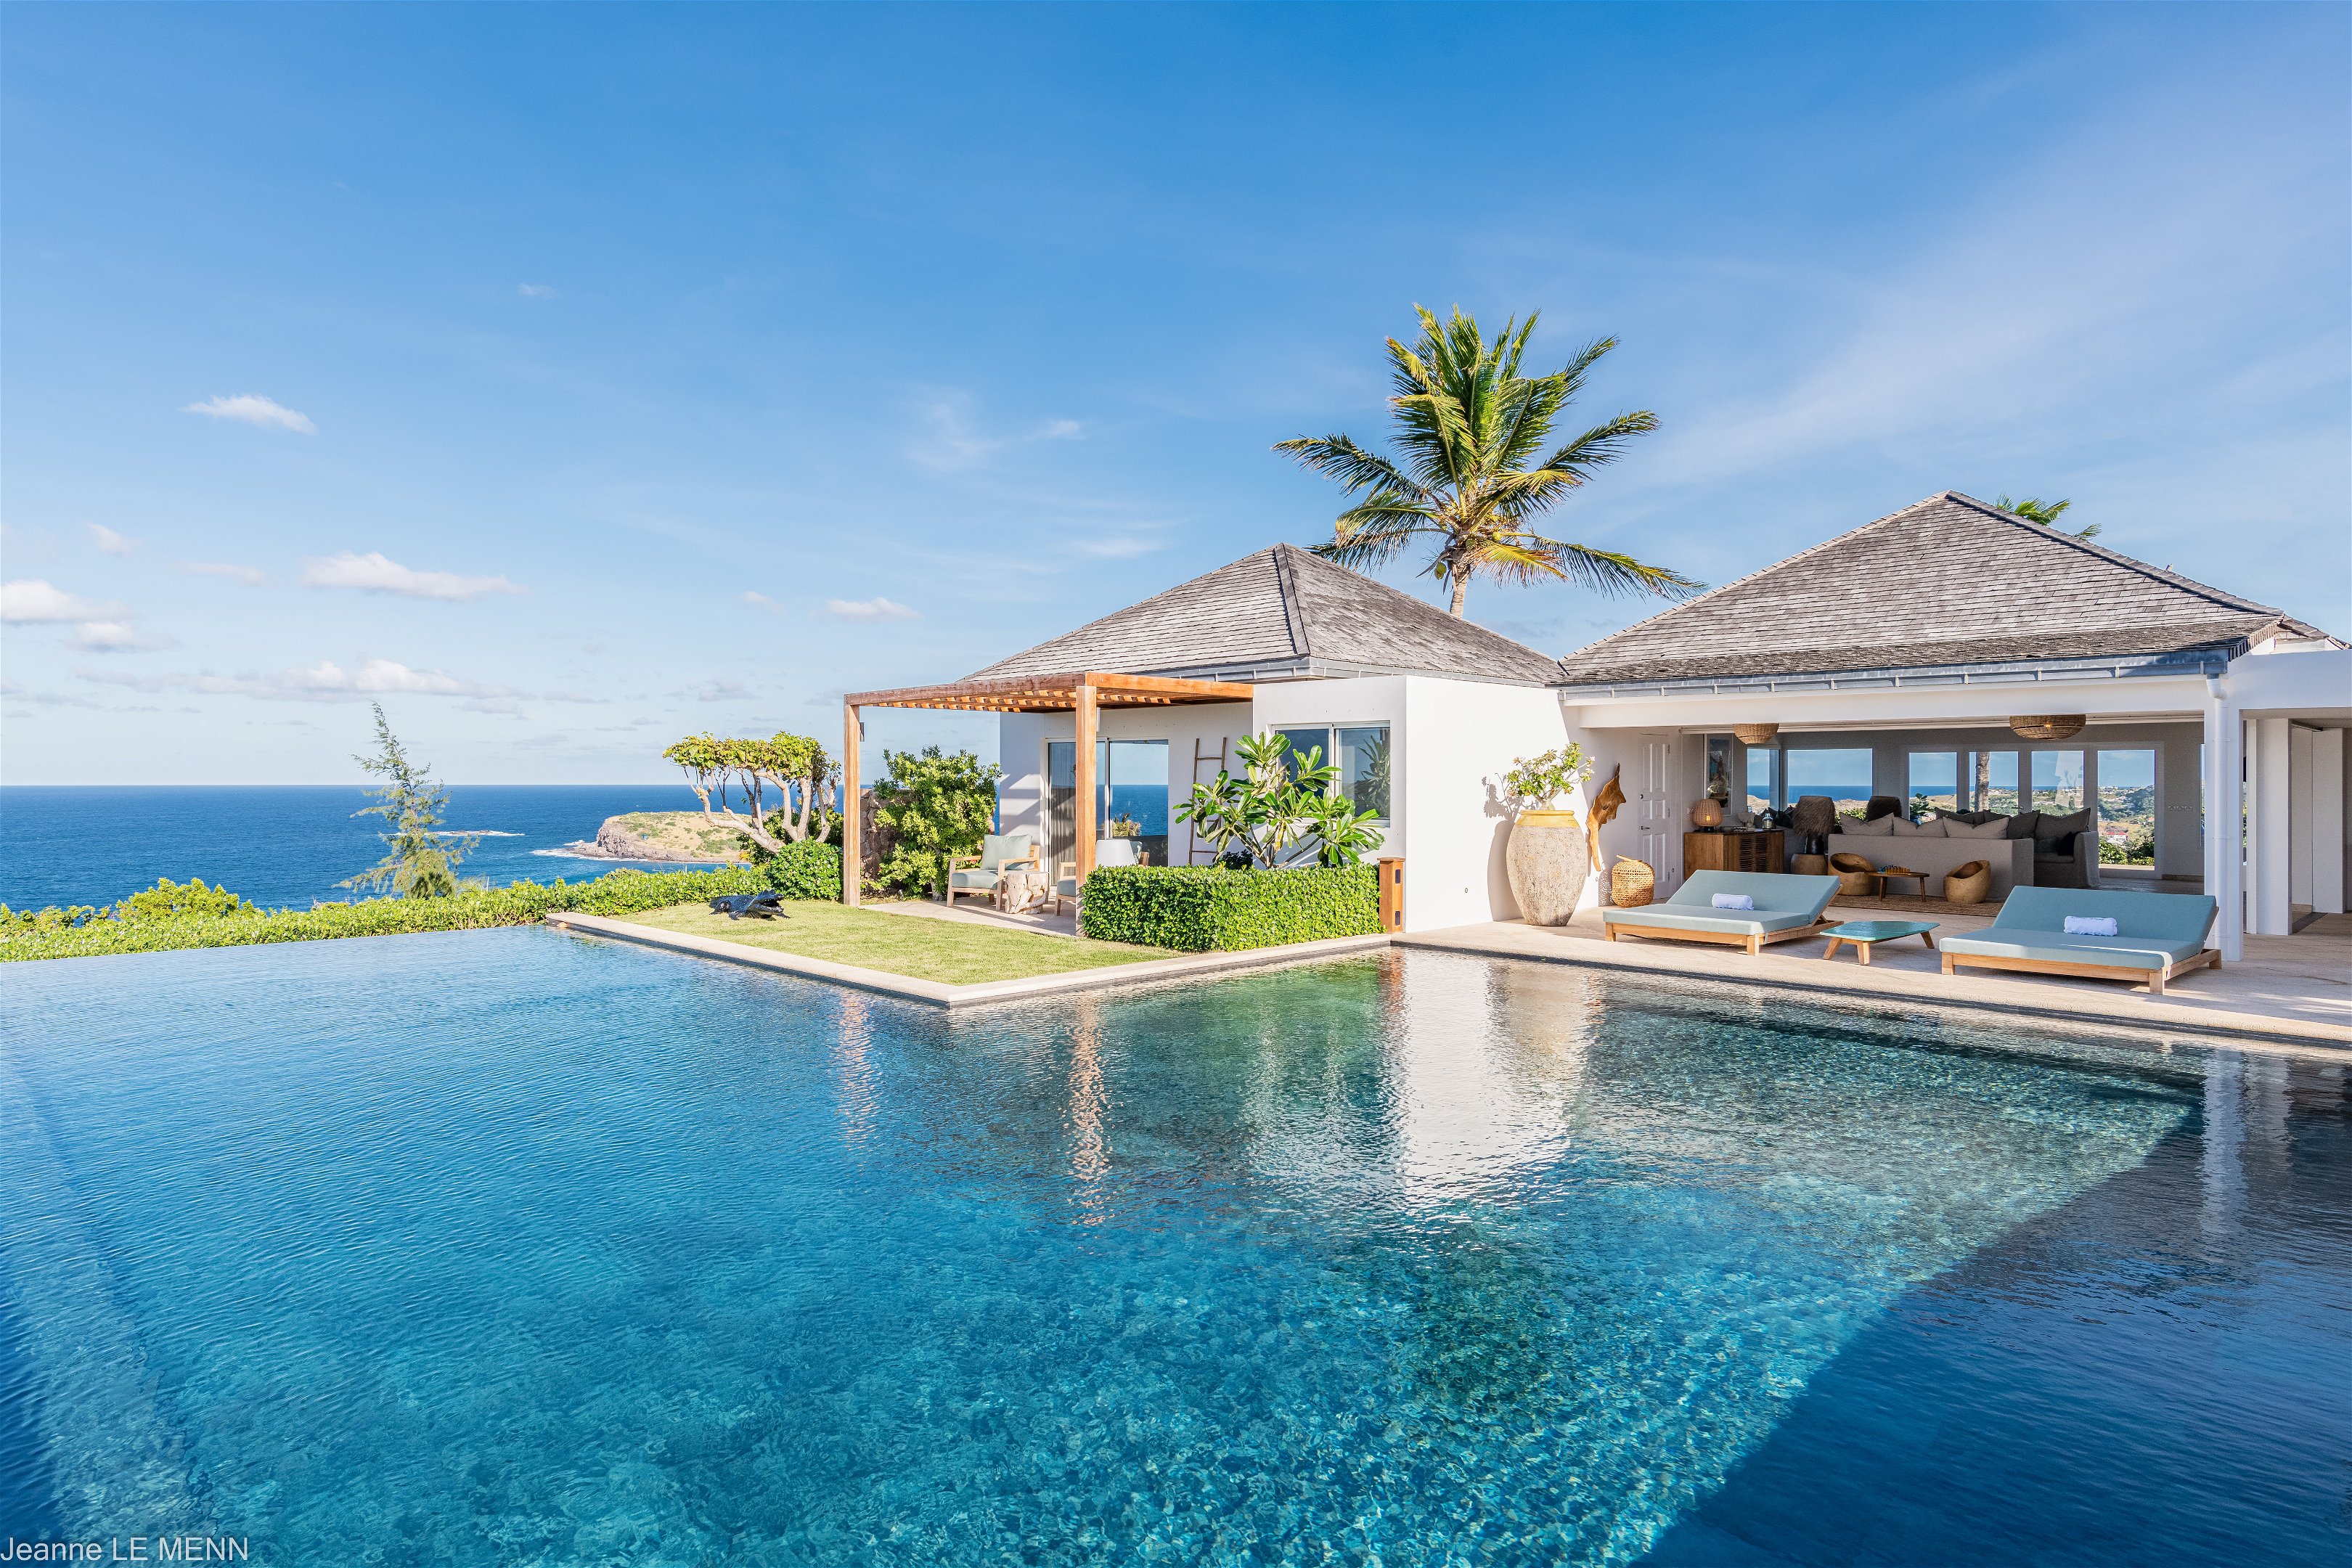 Heated pool surrounded by a spacious sun terrace with deckchairs. An outdoor lounge area with large sofas is on the Terrace facing the spectacular views of Pointe Milou and the ocean. 